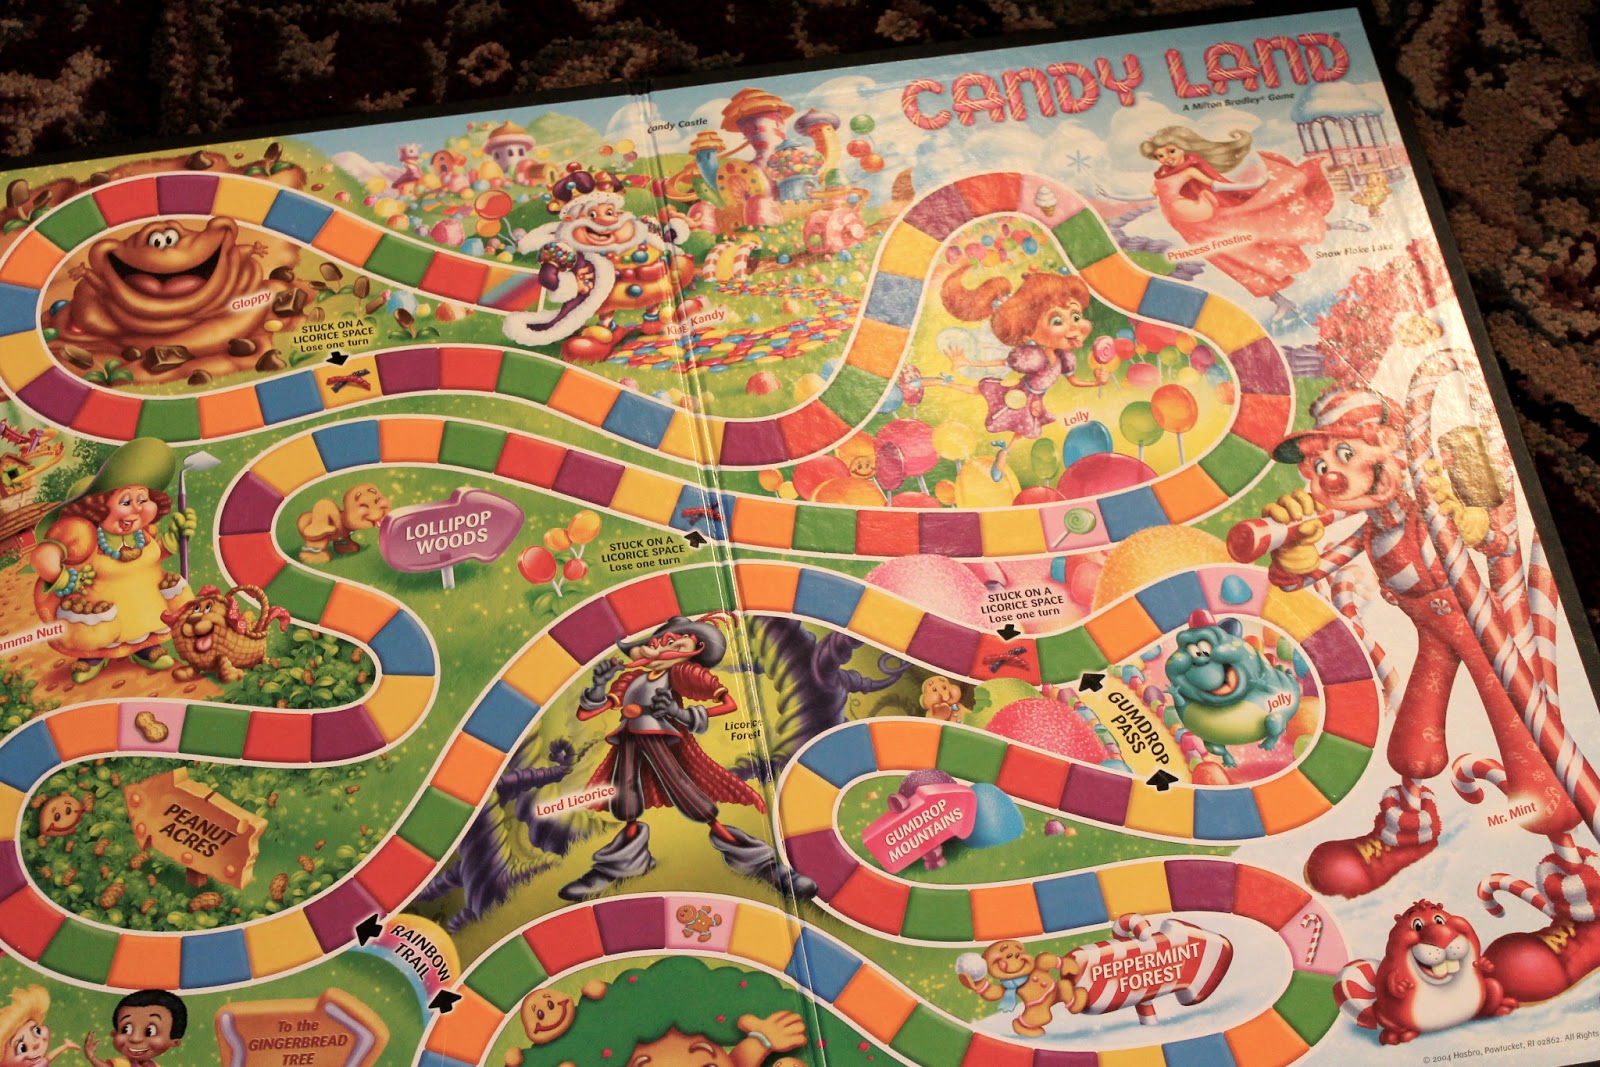 Whats Up At The White House Extreme Candyland A Sensational GamesHD